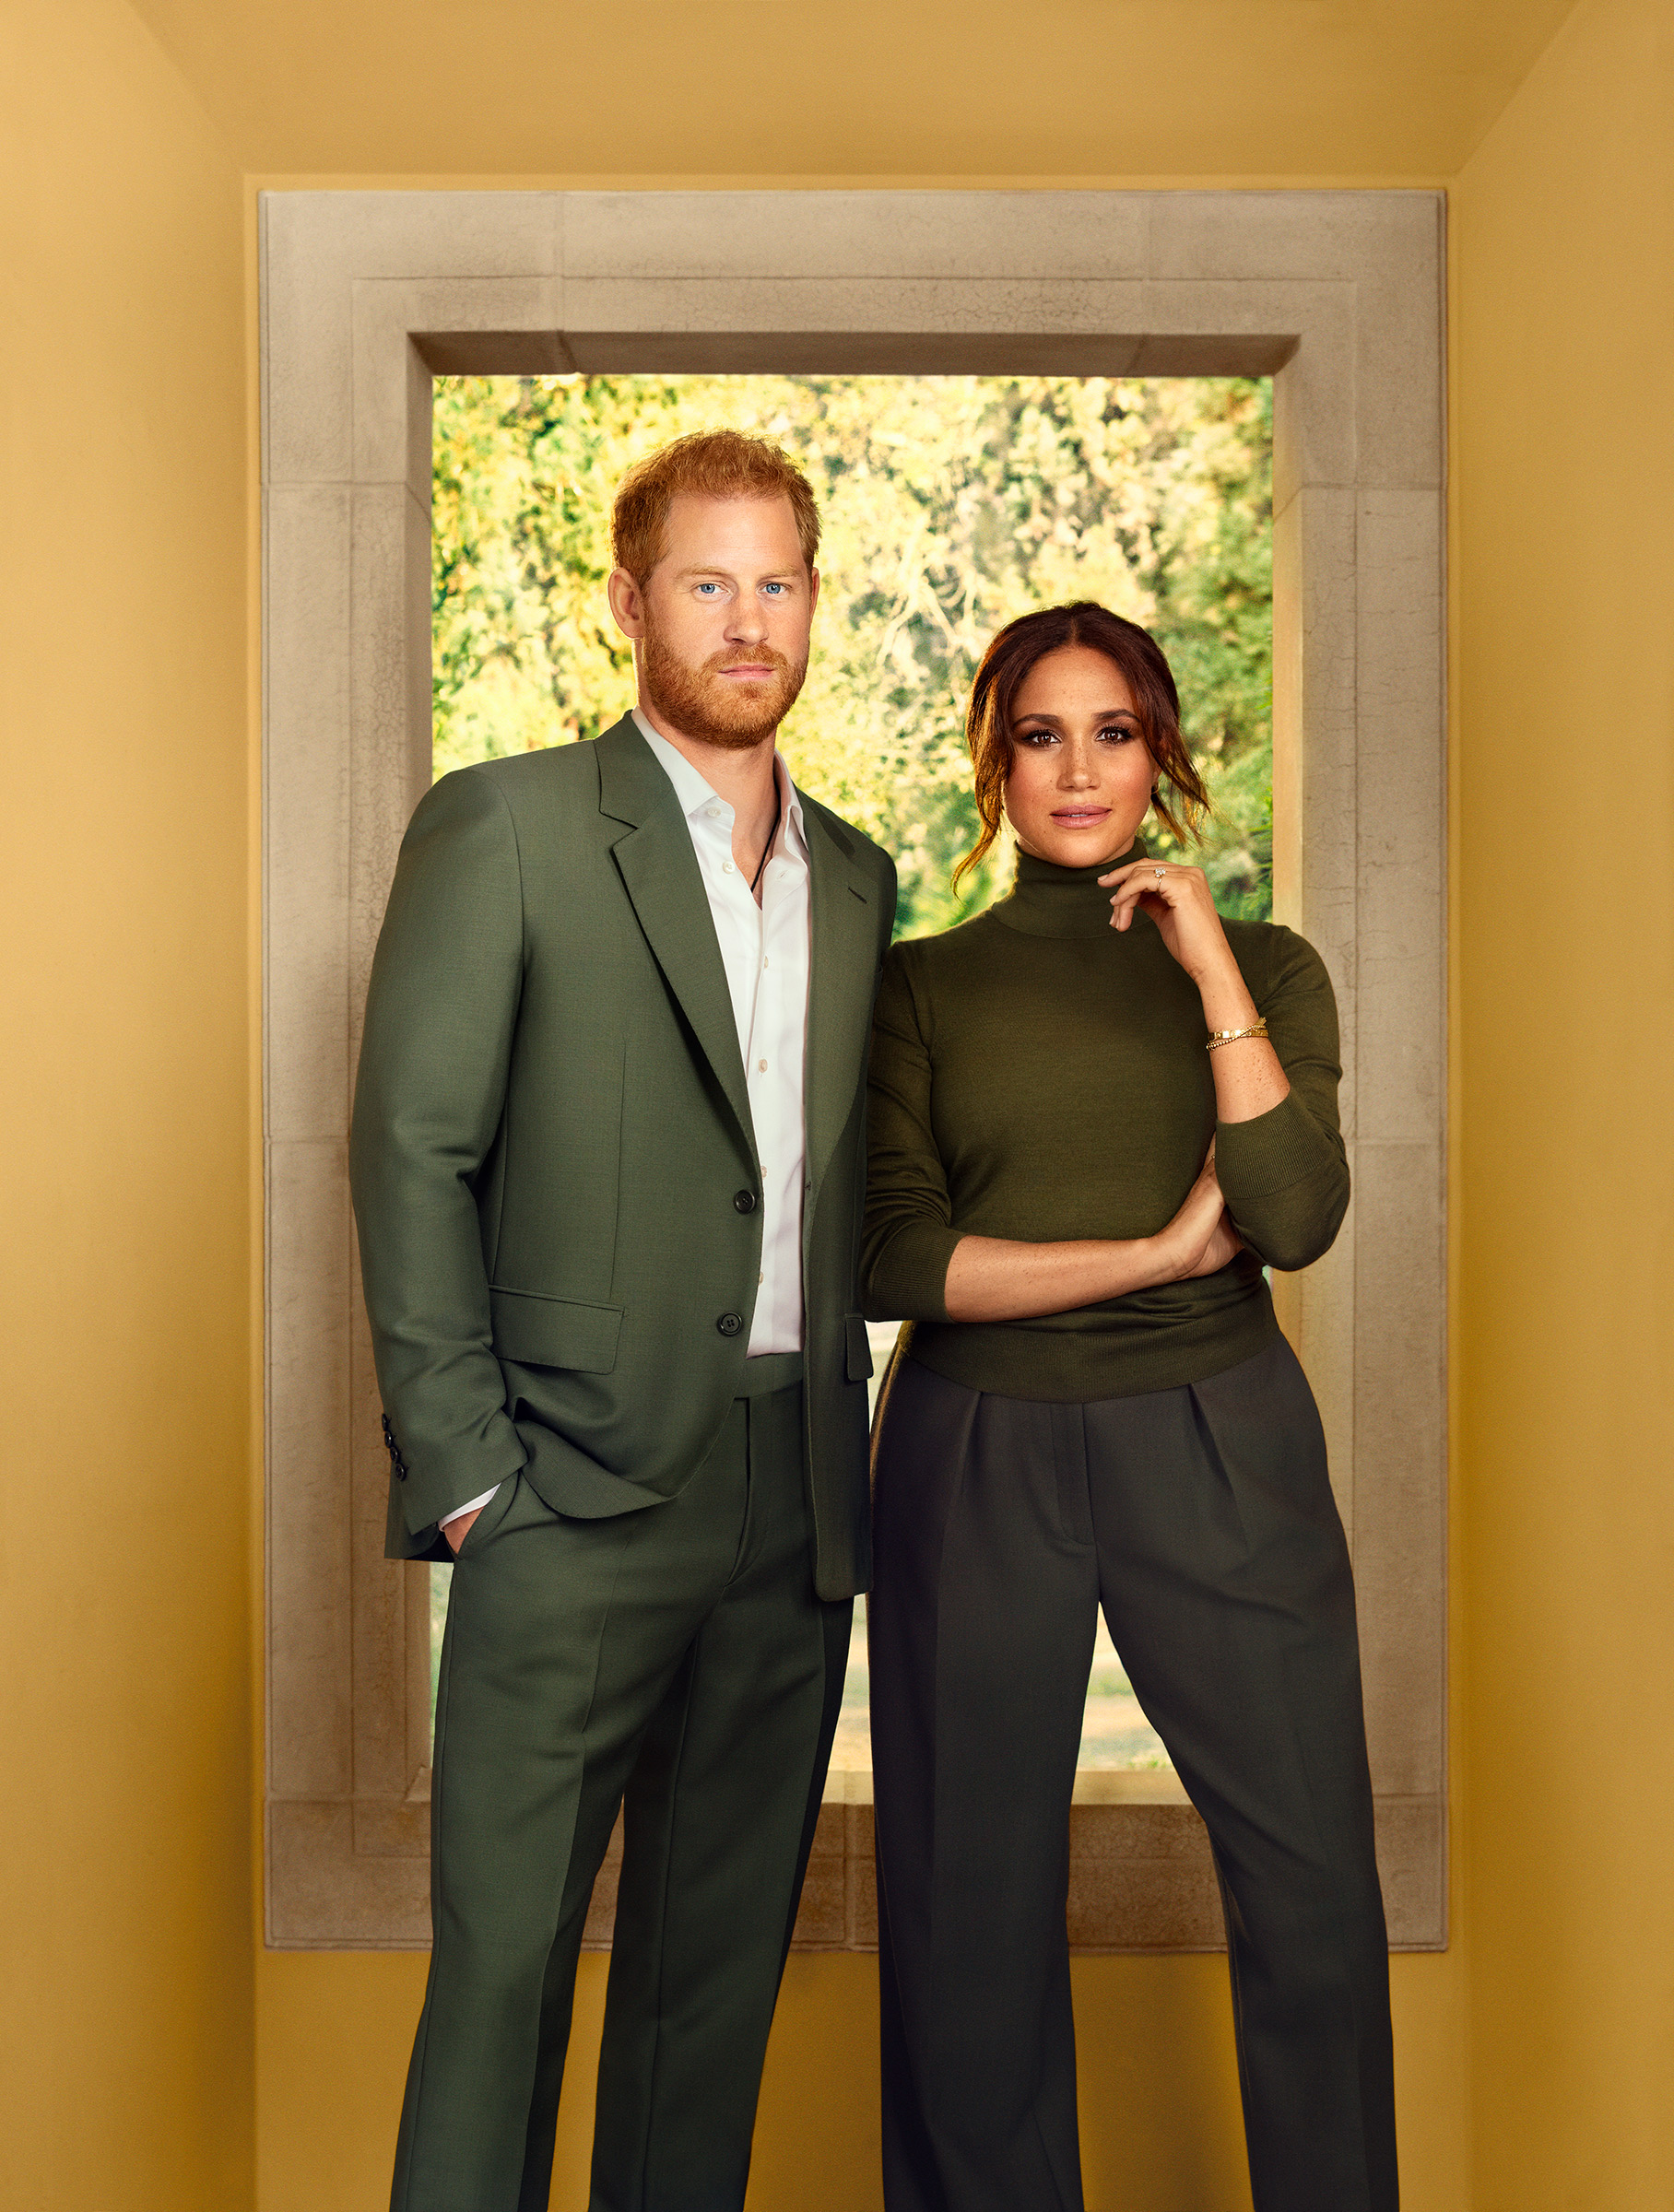 <strong>Prince Harry and Meghan, The Duke and Duchess of Sussex</strong>. "<a href="https://time.com/collection/100-most-influential-people-2021/6096108/prince-harry-meghan/">The 100 Most Influential People</a>," Sept. 27 issue. (Pari Dukovic for TIME)